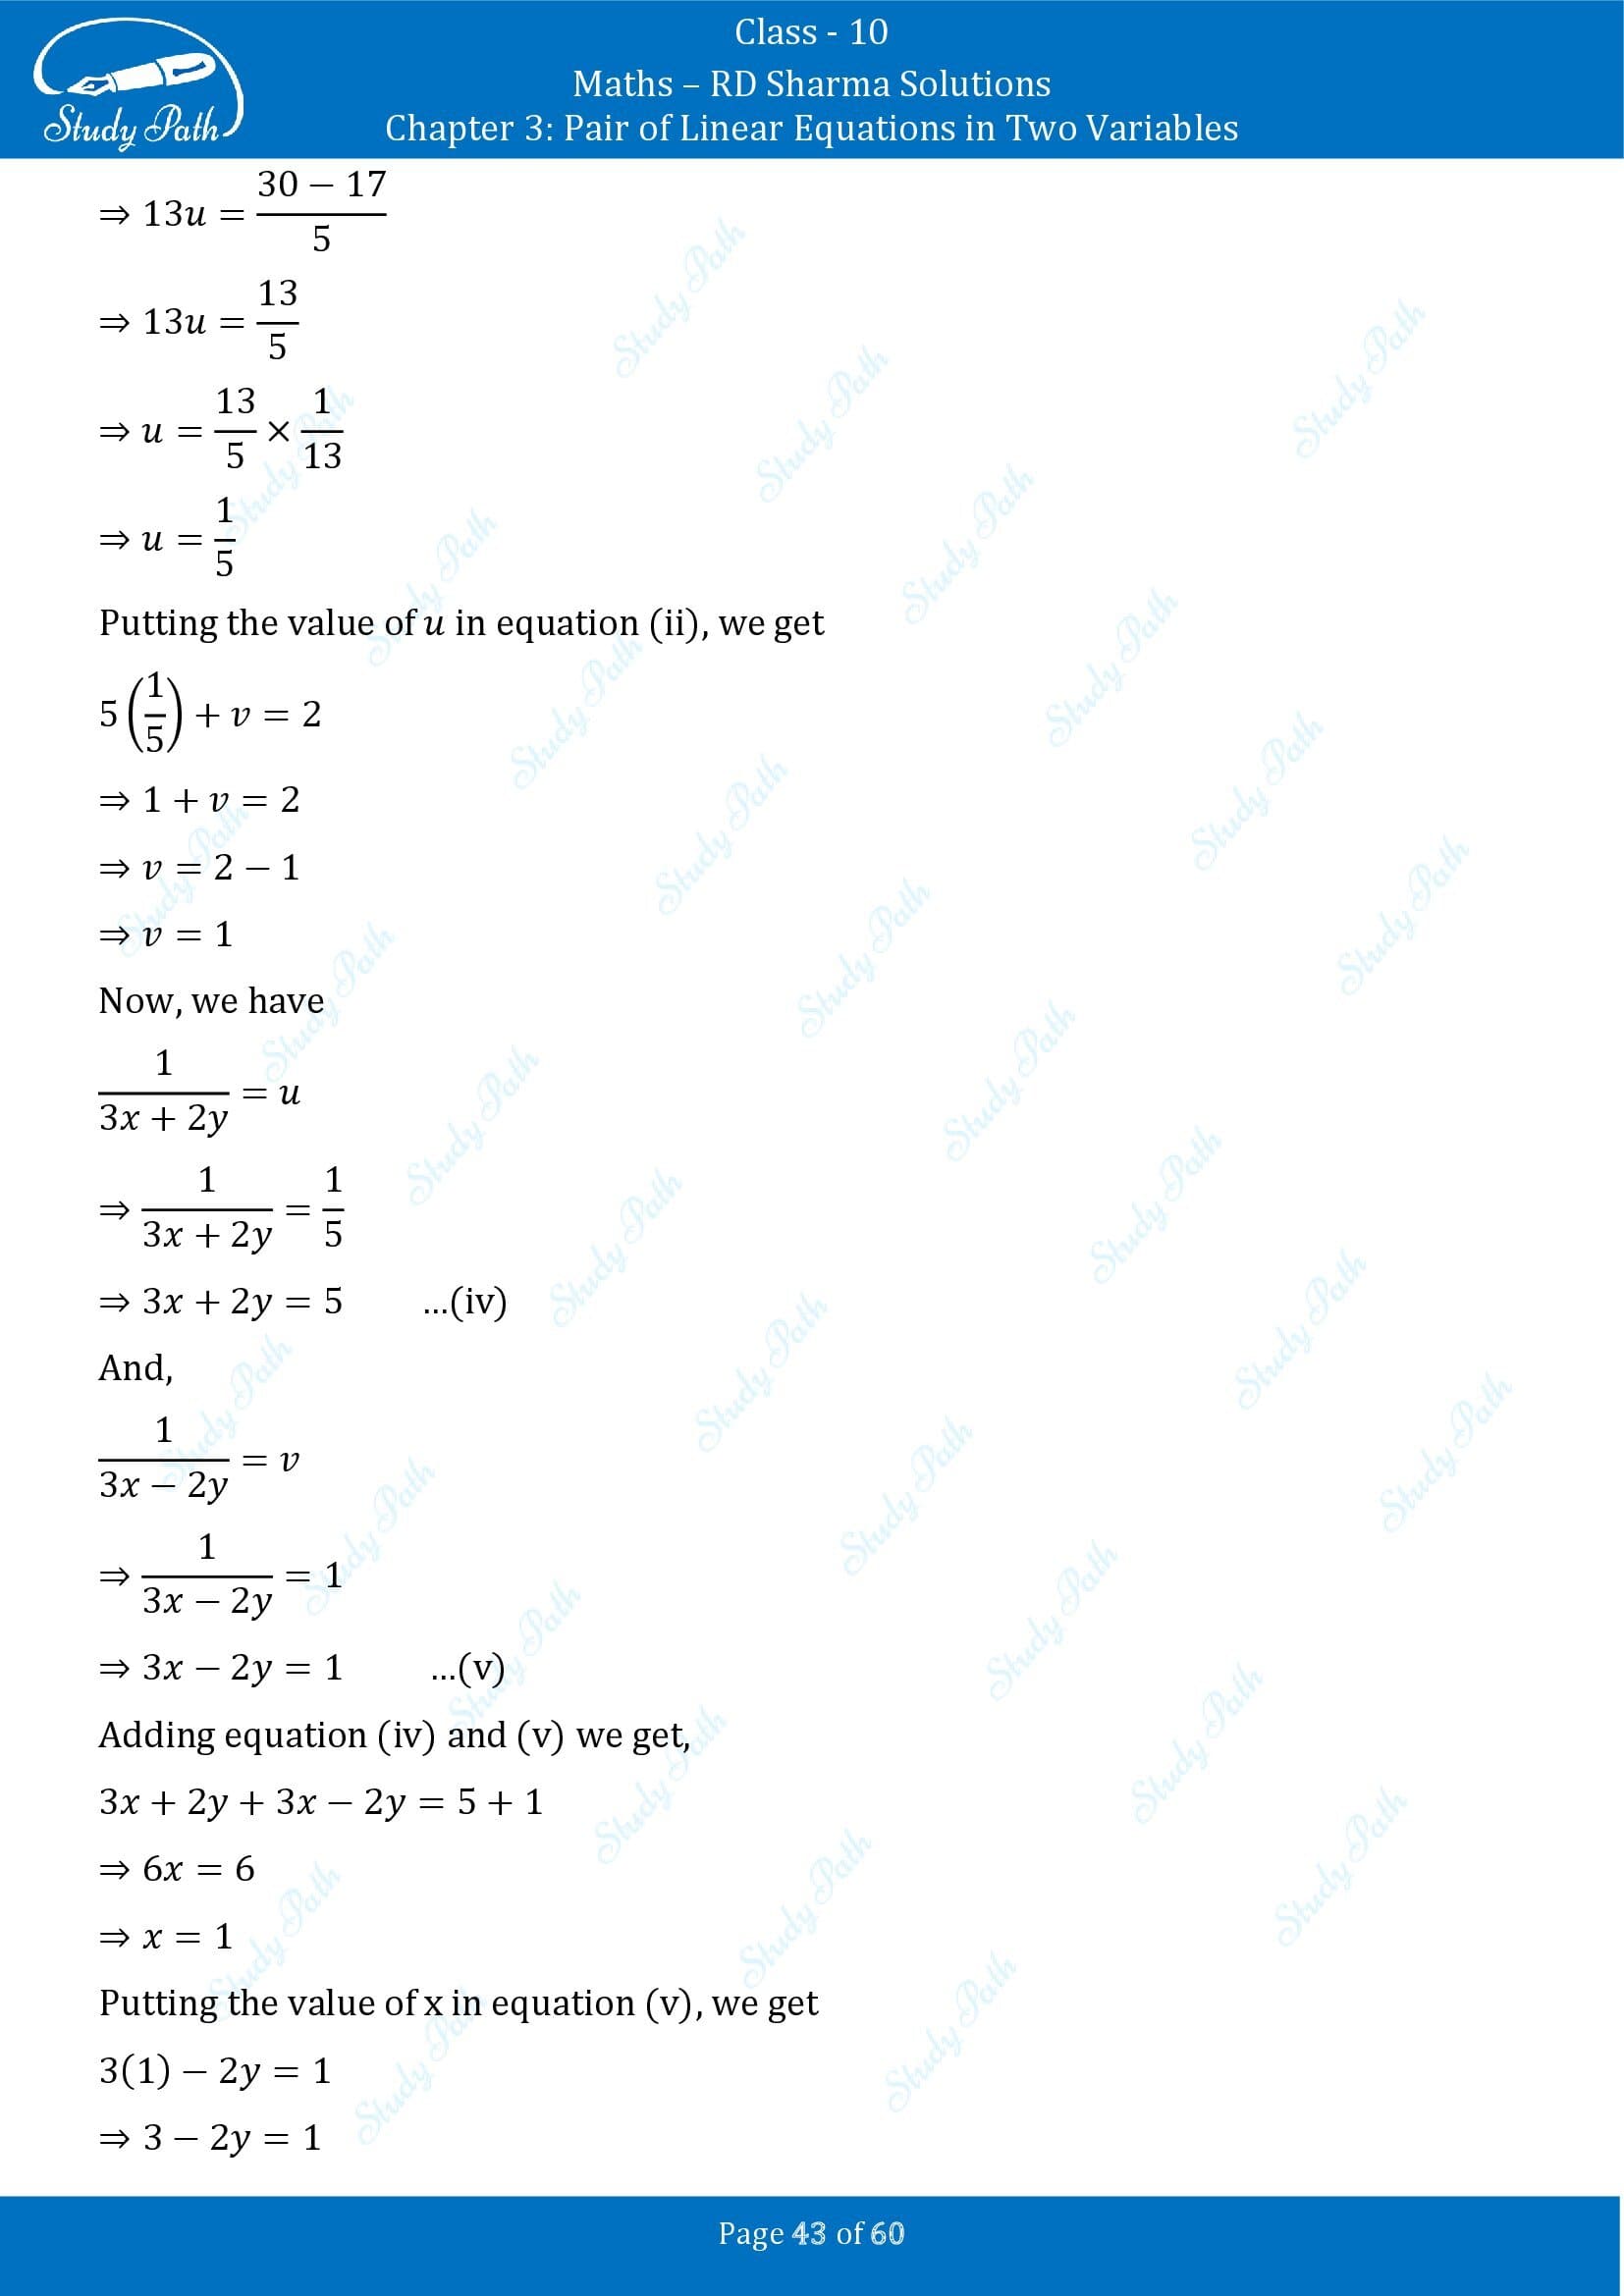 RD Sharma Solutions Class 10 Chapter 3 Pair of Linear Equations in Two Variables Exercise 3.3 00043